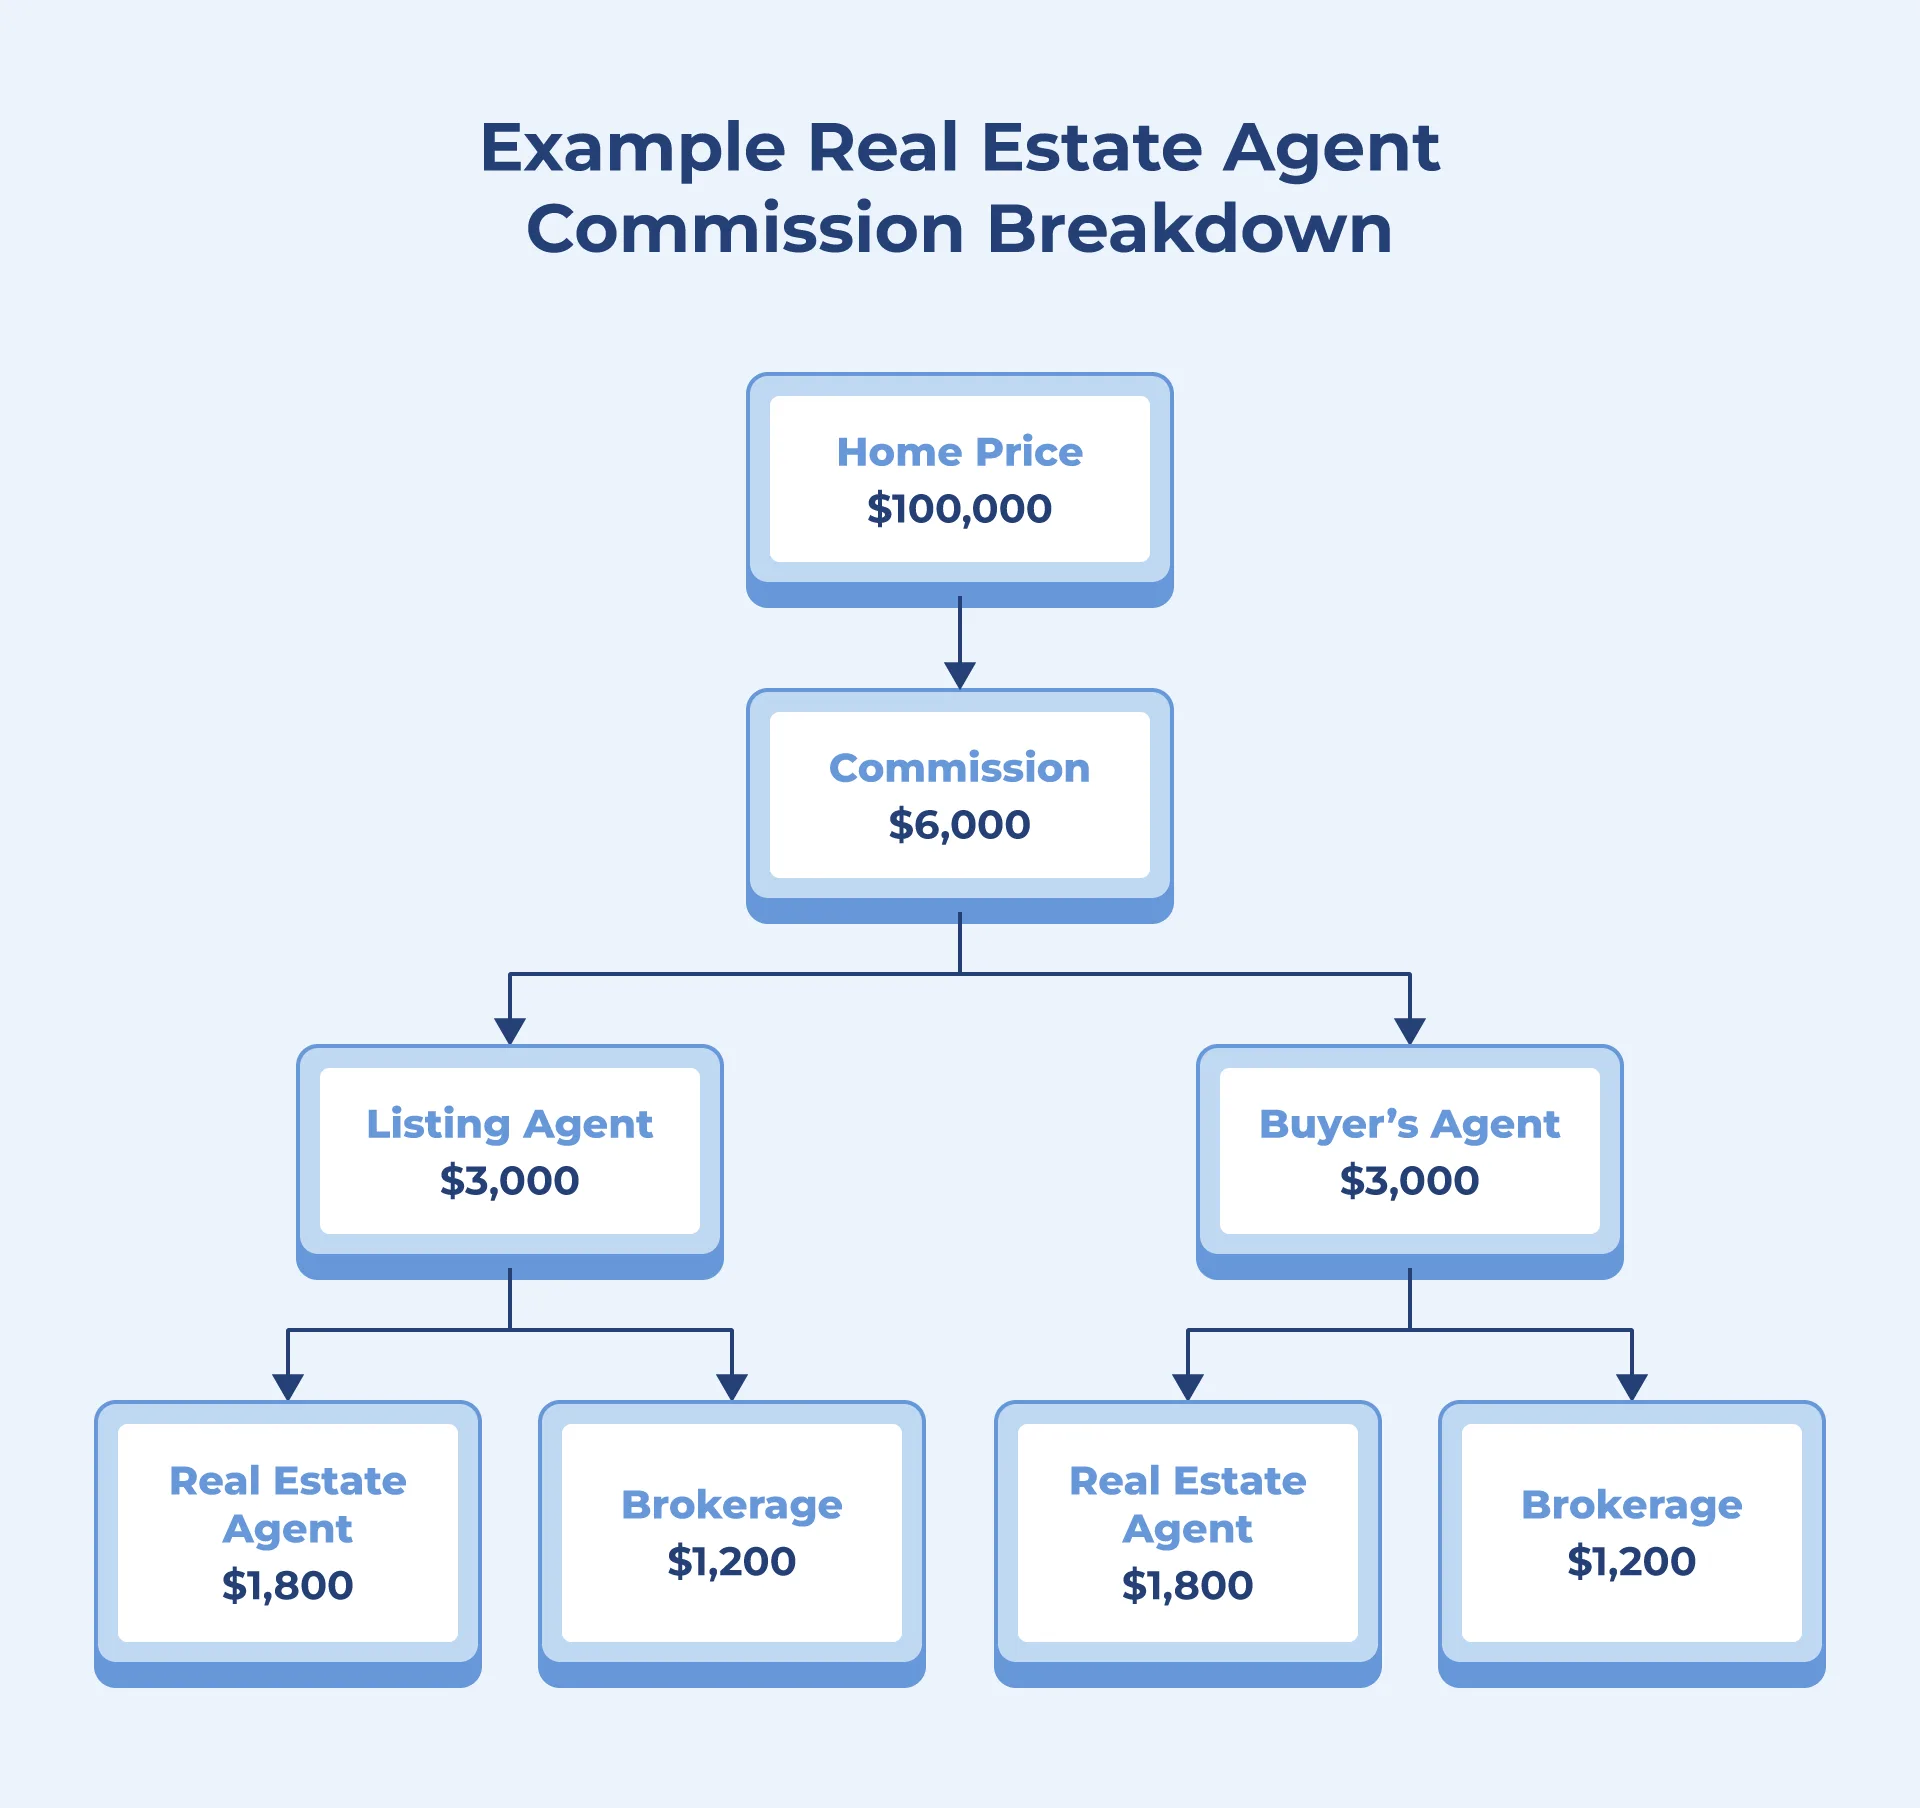 Image shows an example cost breakdown of a real estate agent's commission.